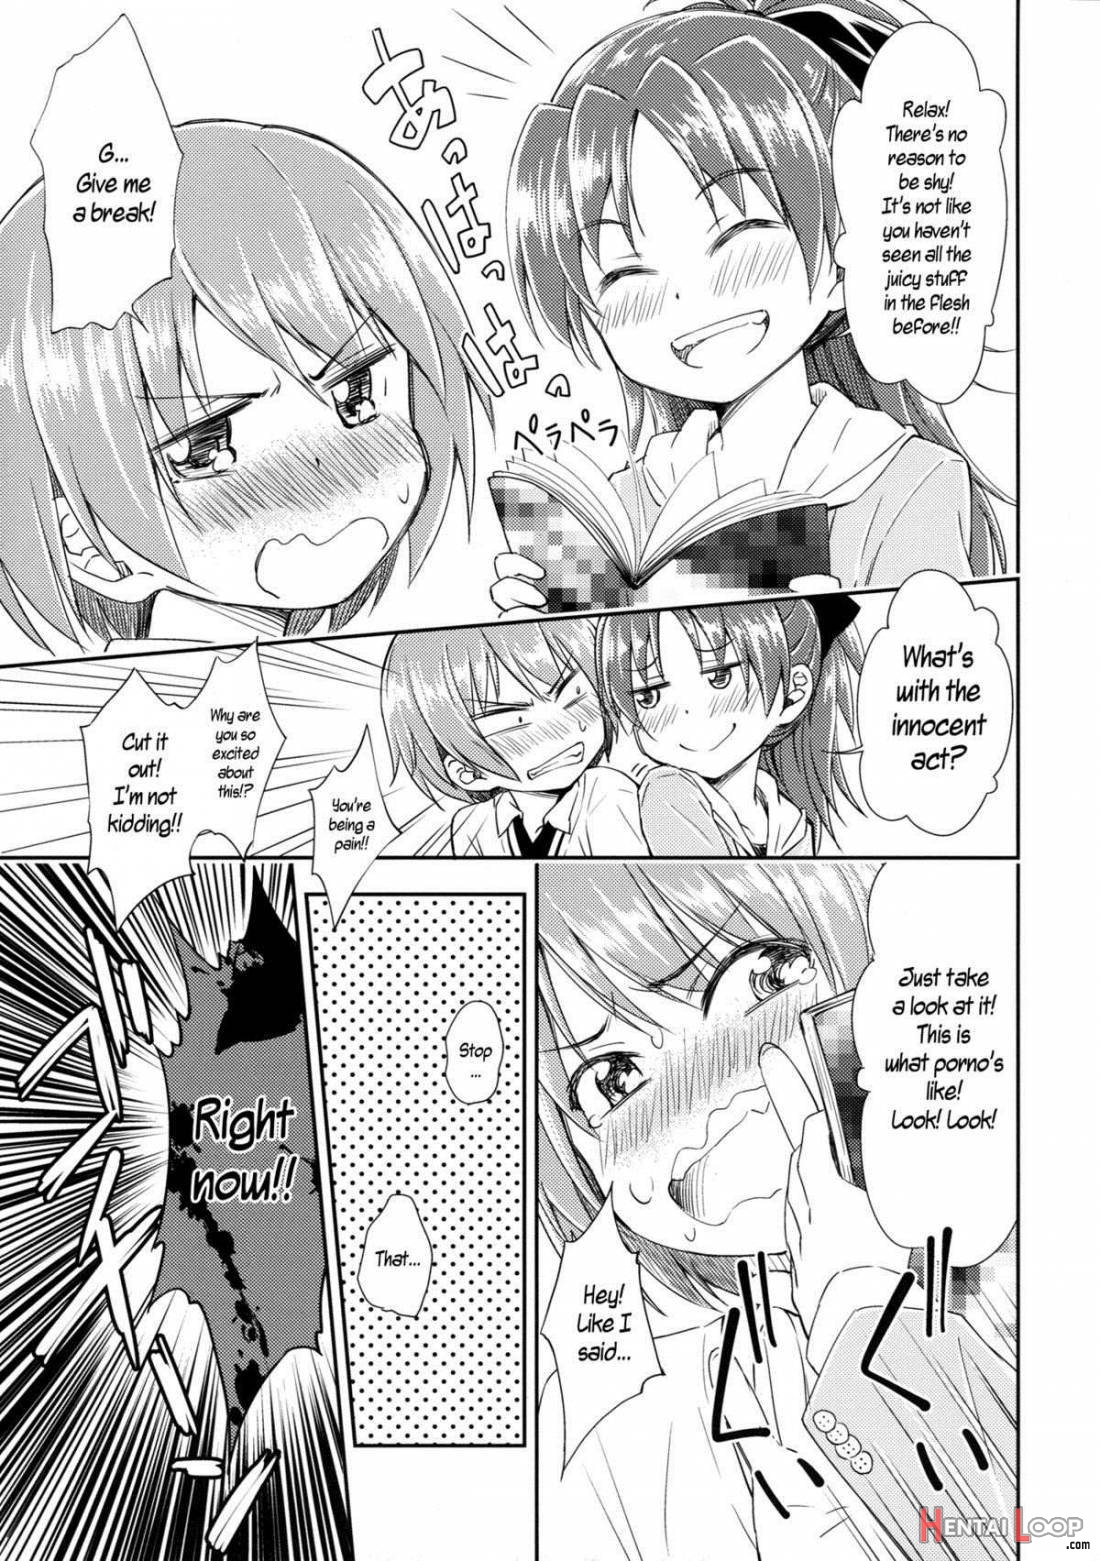 Lovely Girls’ Lily Vol.9 page 5